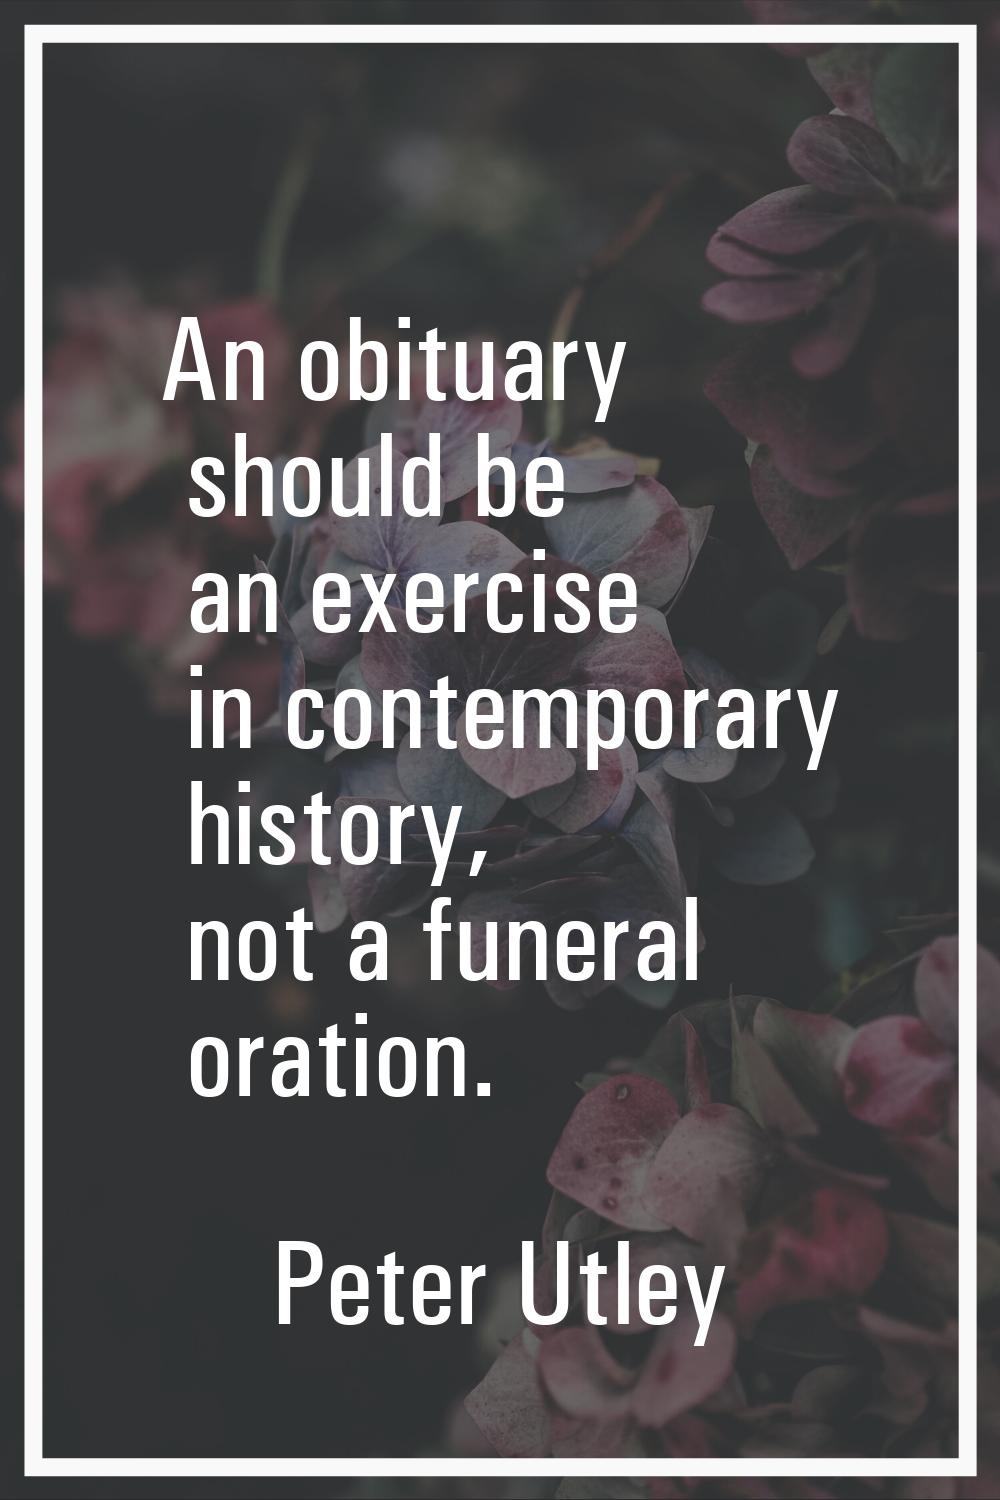 An obituary should be an exercise in contemporary history, not a funeral oration.